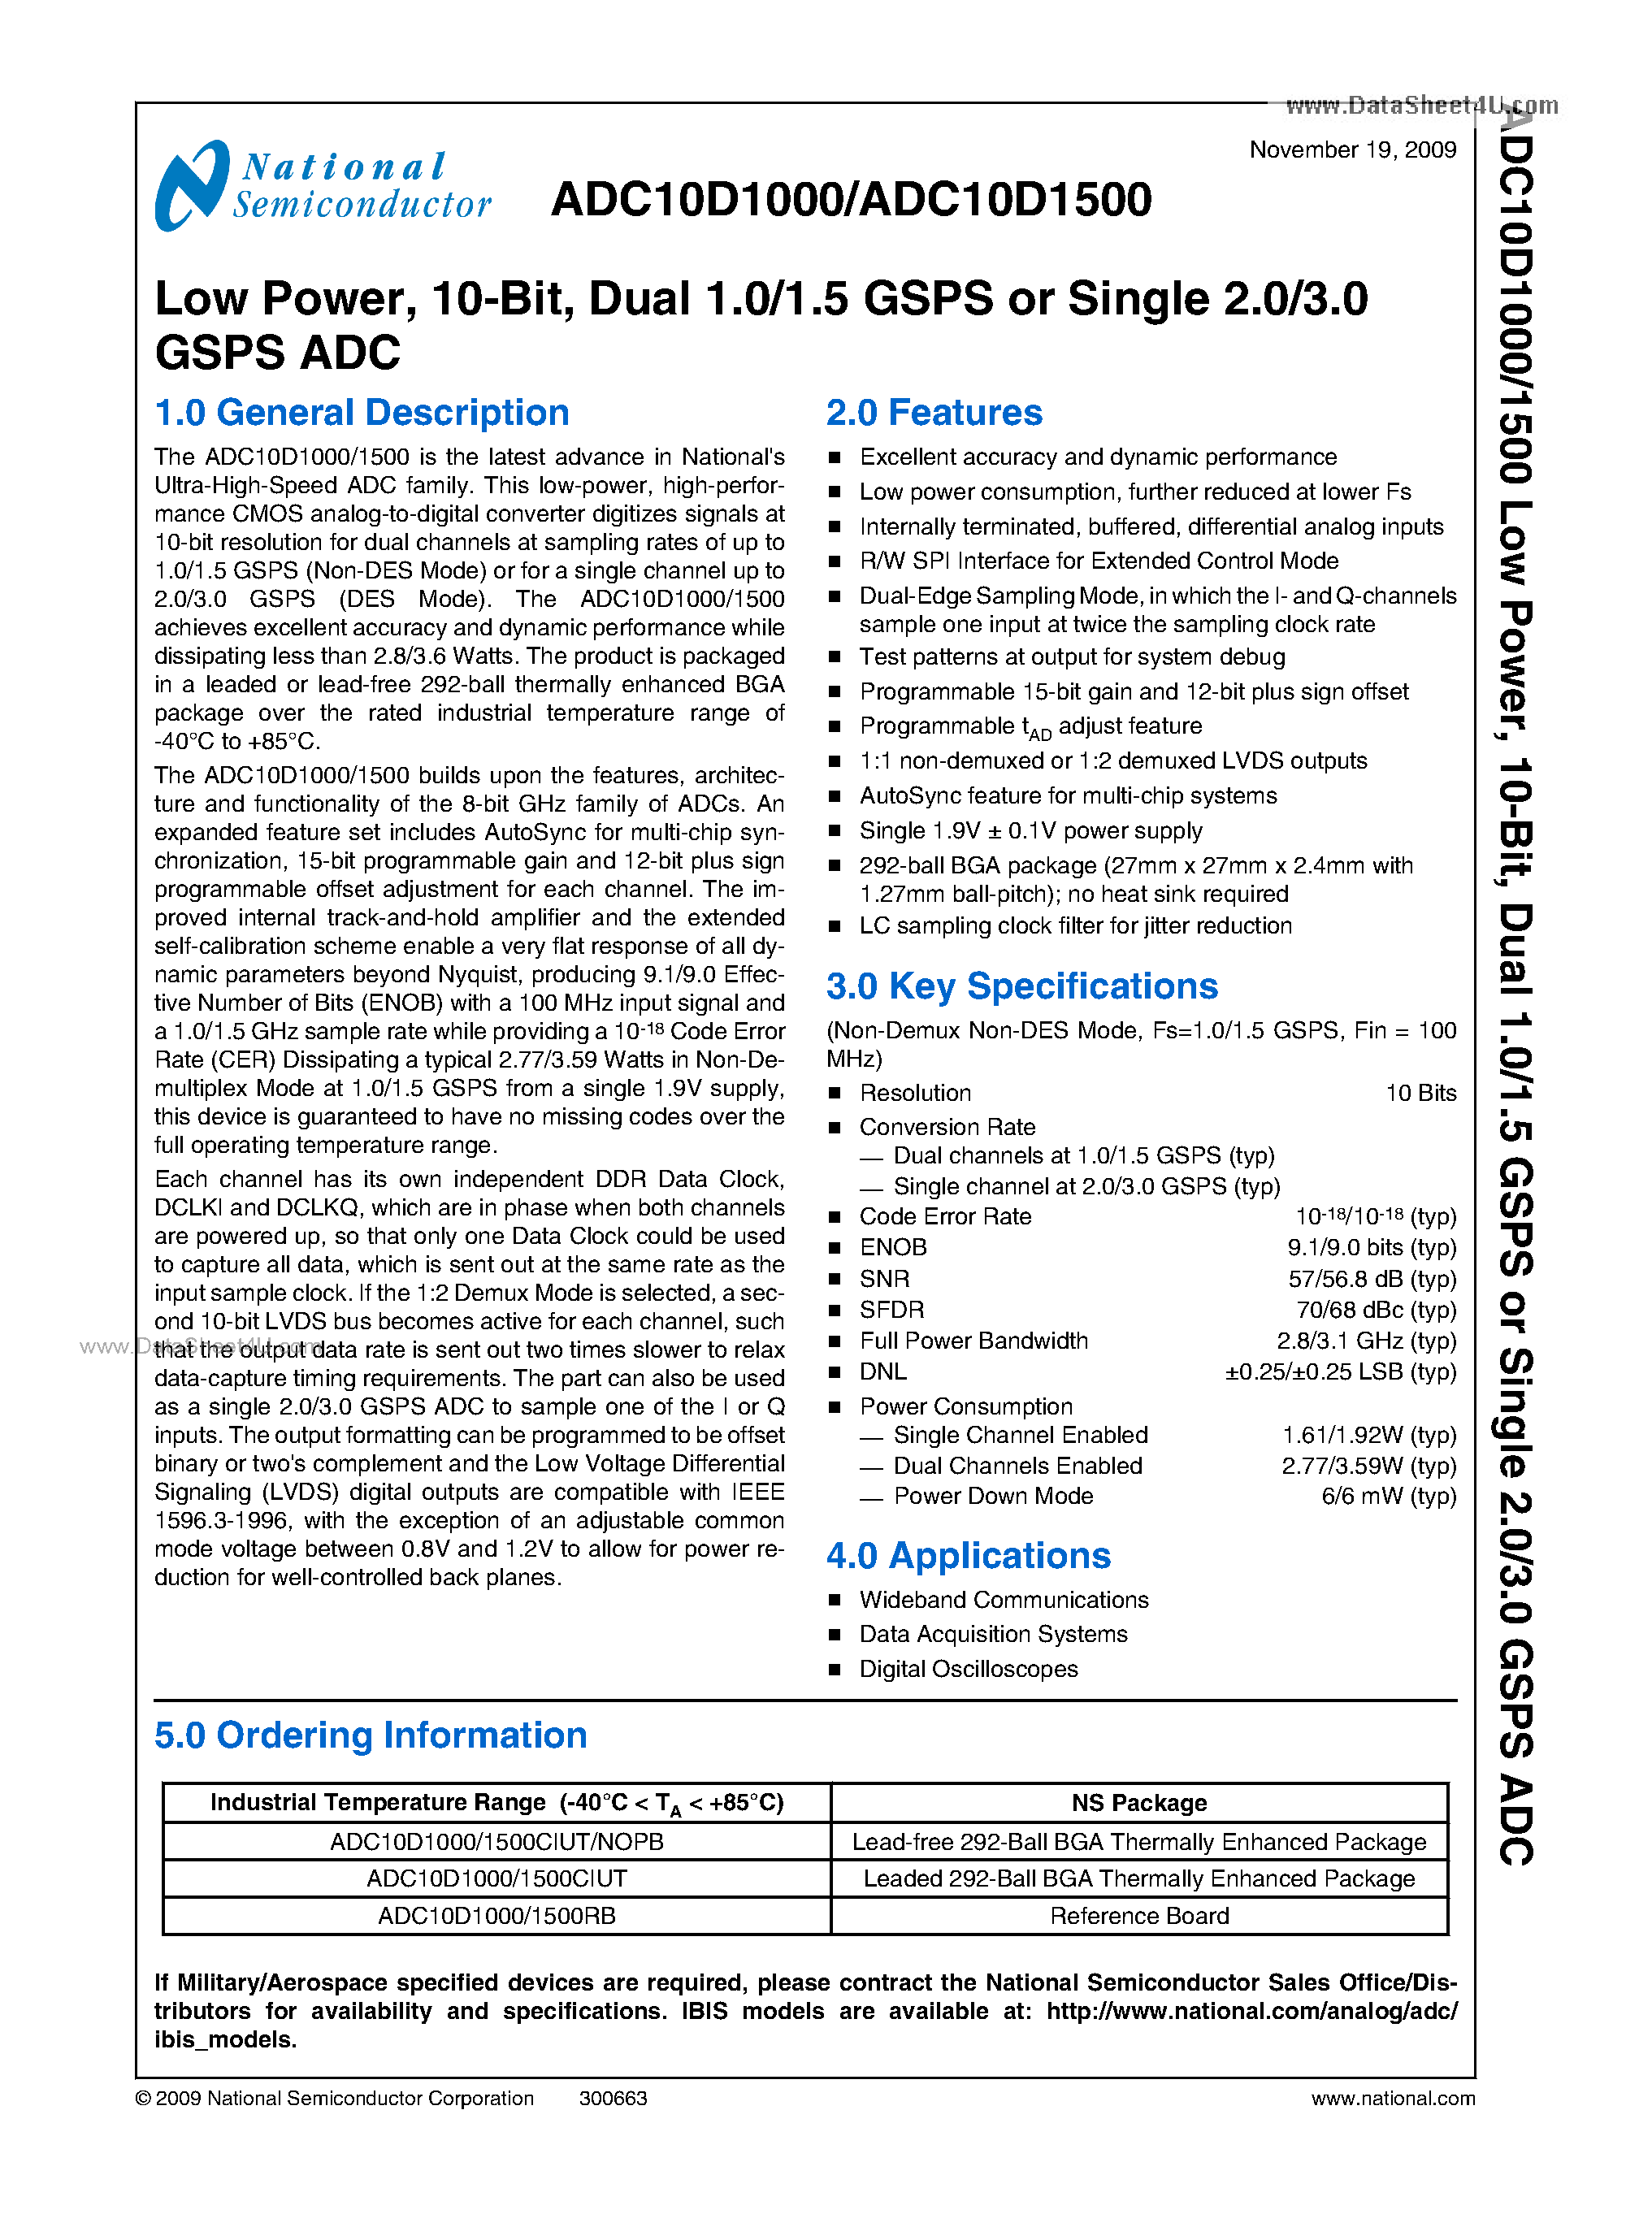 Datasheet ADC10D1000 - (ADC10D1000 / ADC10D1500) Dual 1.0/1.5 GSPS Or Single 2.0/3.0 GSPS ADC page 1